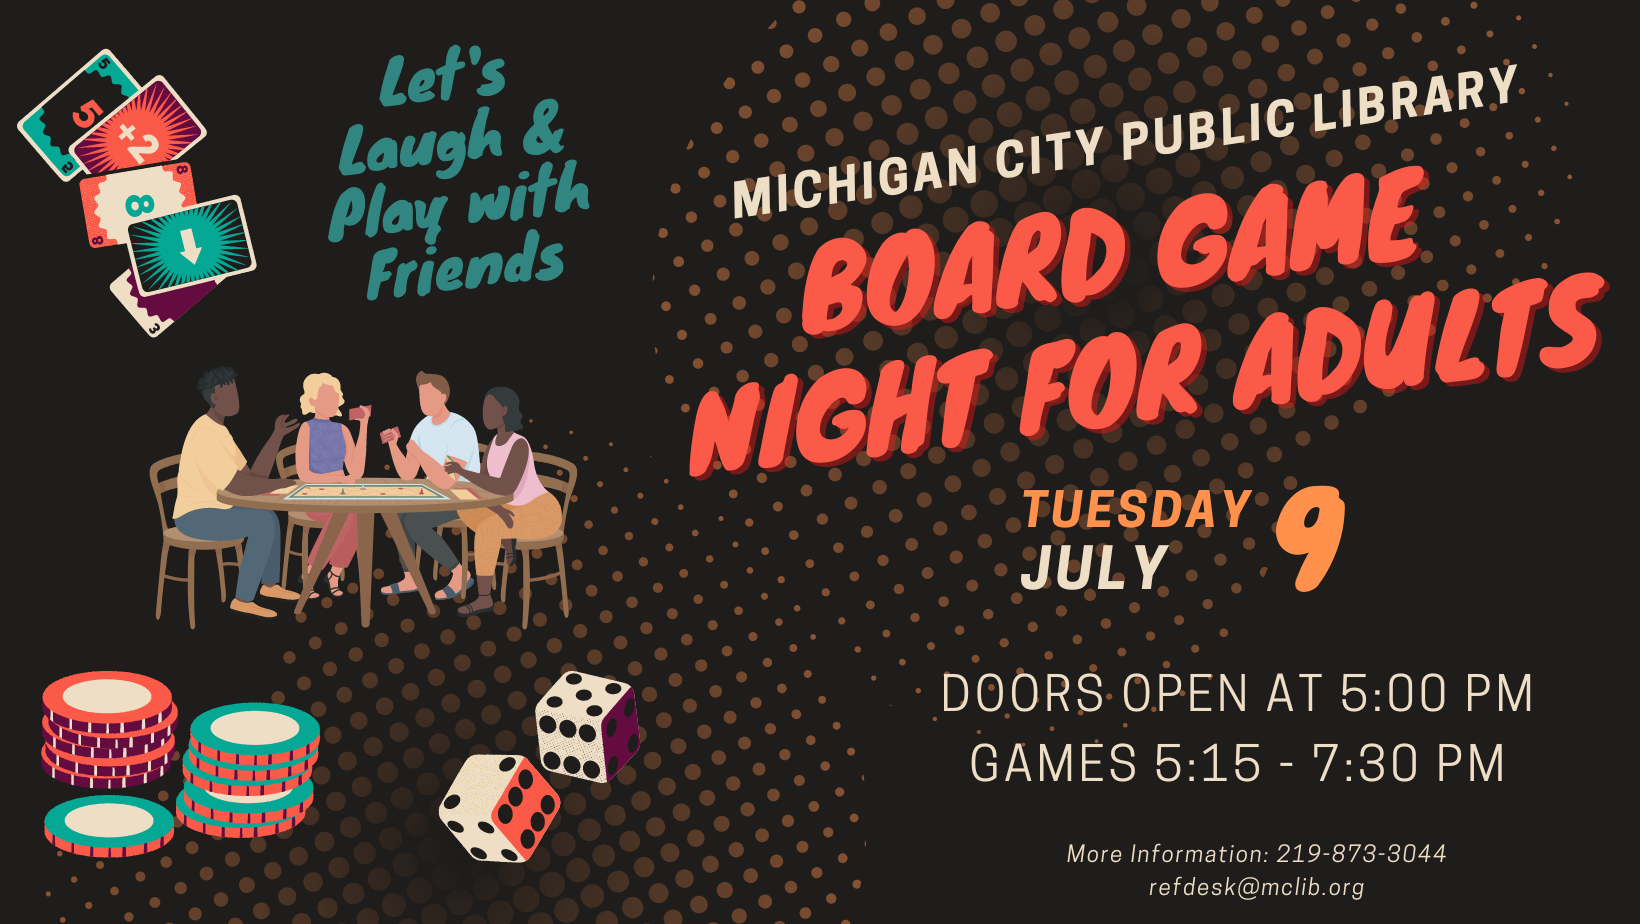 Board Game Night for Adults, Tuesday, July 9 at 5:00 pm